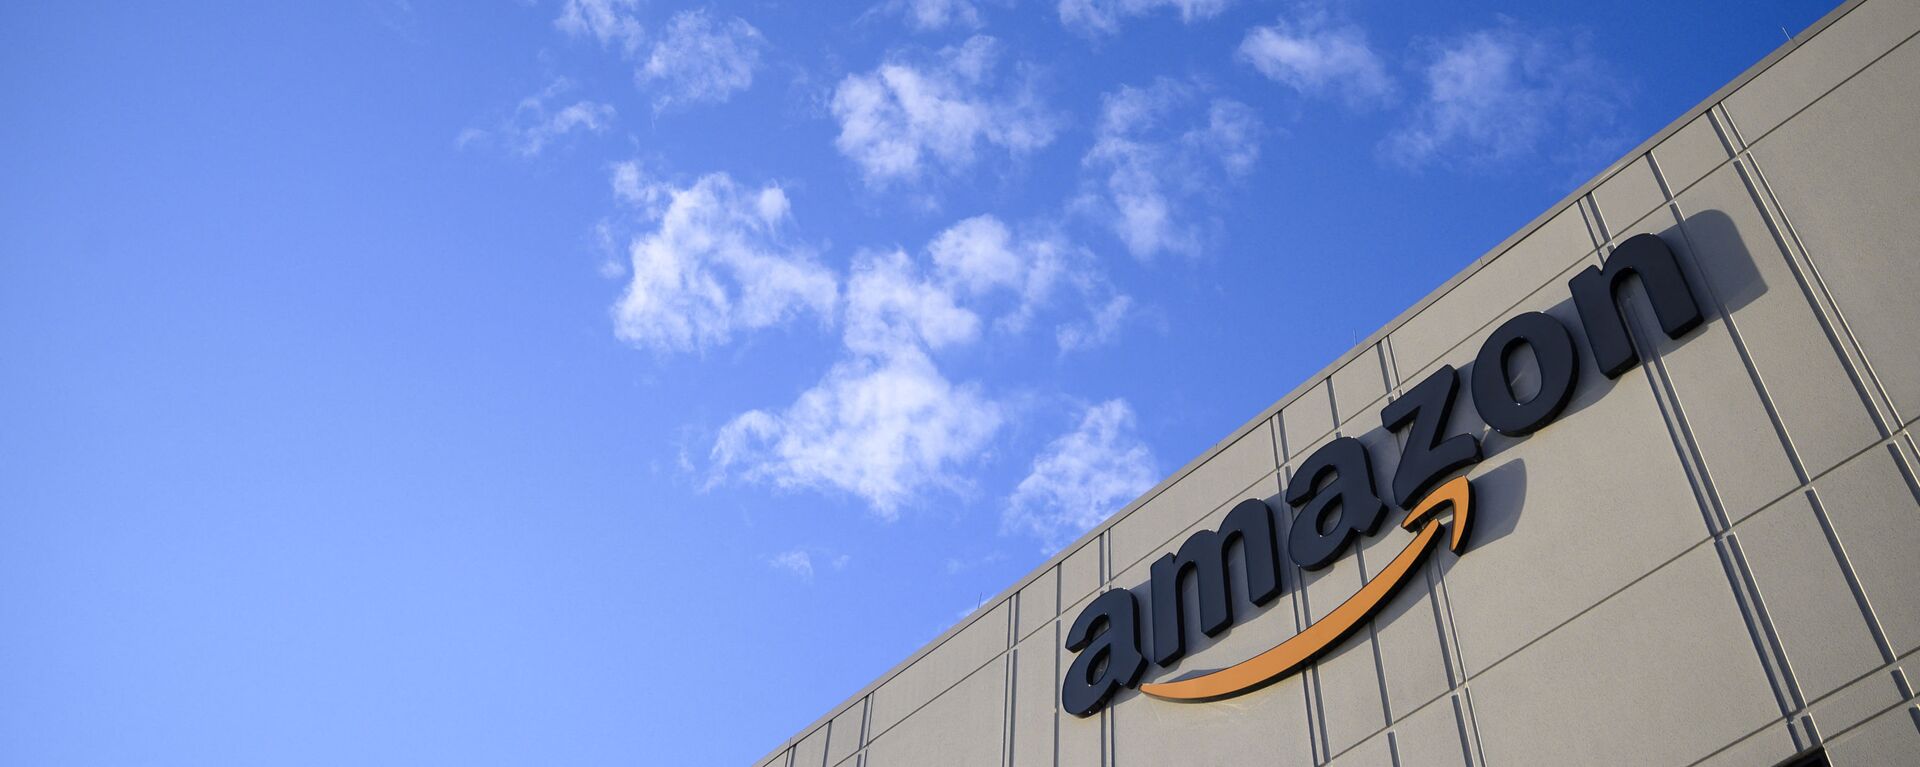  In this file photo taken on April 5, 2021, the Amazon logo at the 855,000-square-foot Amazon fulfillment center is seen in Staten Island, one of the five boroughs of New York City, on February 5, 2019. - Tech and e-commerce colossus Amazon on April 29, 2021 reported that its profit in the recently ended quarter tripled as online sales boomed. - Sputnik International, 1920, 05.01.2023